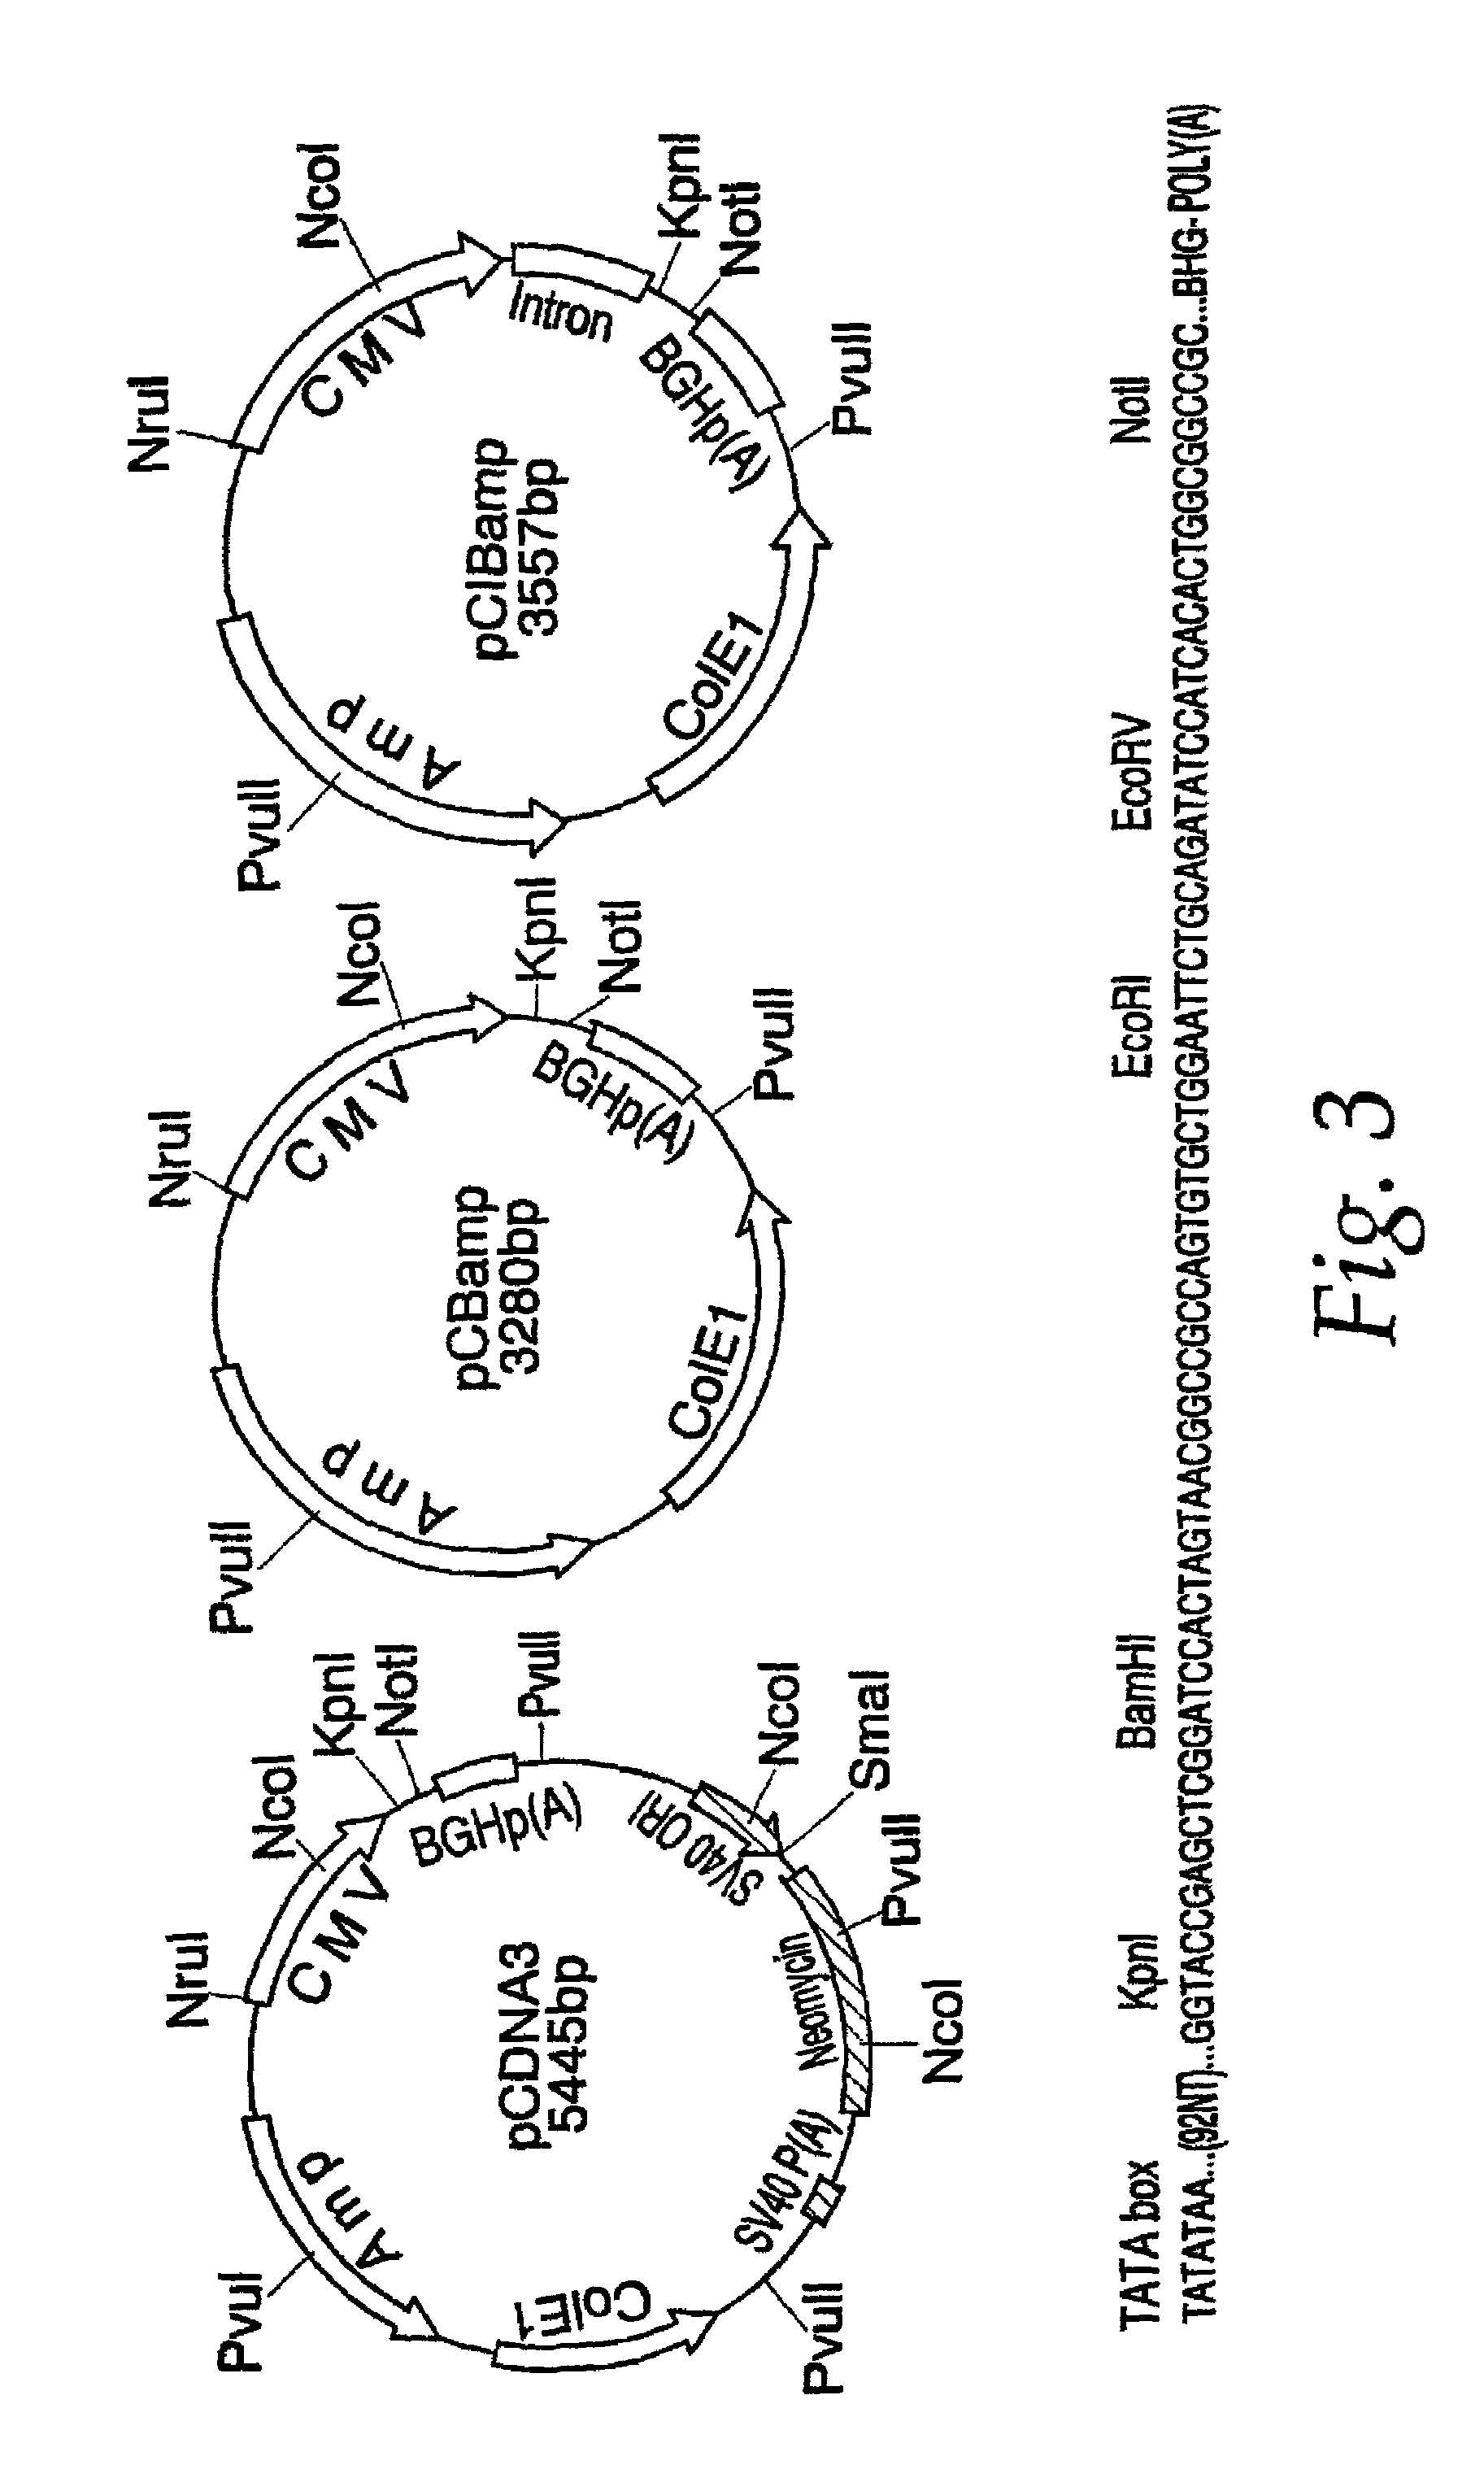 Nucleic acid <i>vaccines</i> for prevention of flavivirus infection